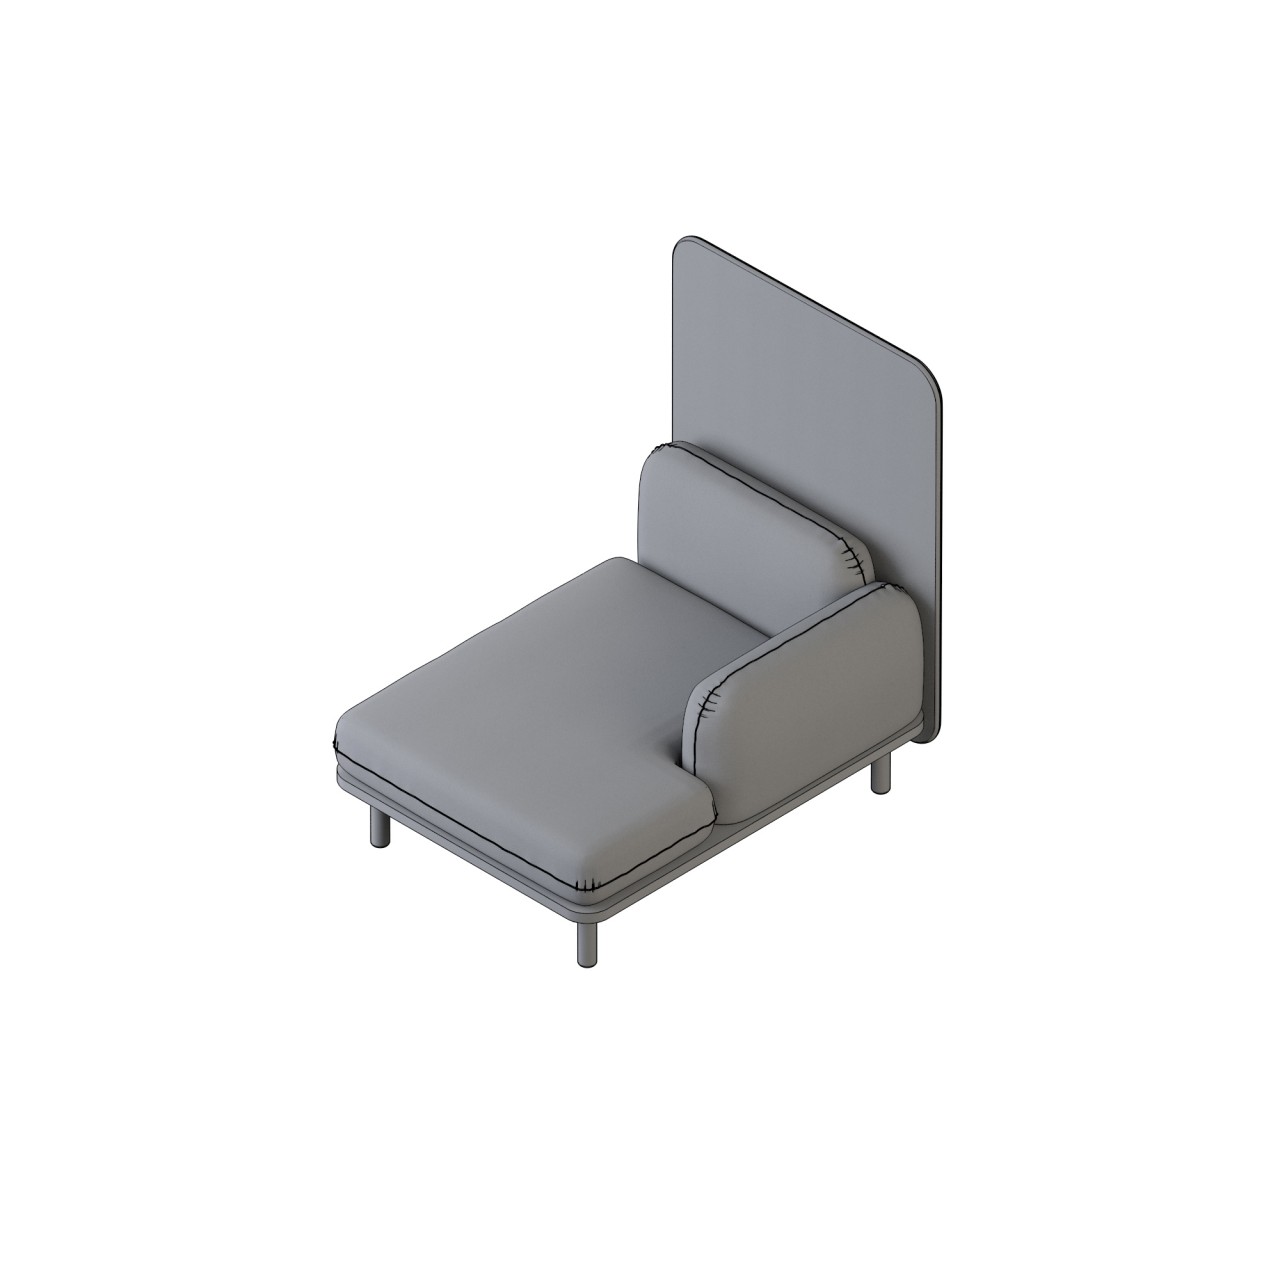 Soft - 24010L-B
left arm chaise
privacy
COM 9.75
arms 1.25,
back 1.5, base 2,
seat 2.75, panel 3